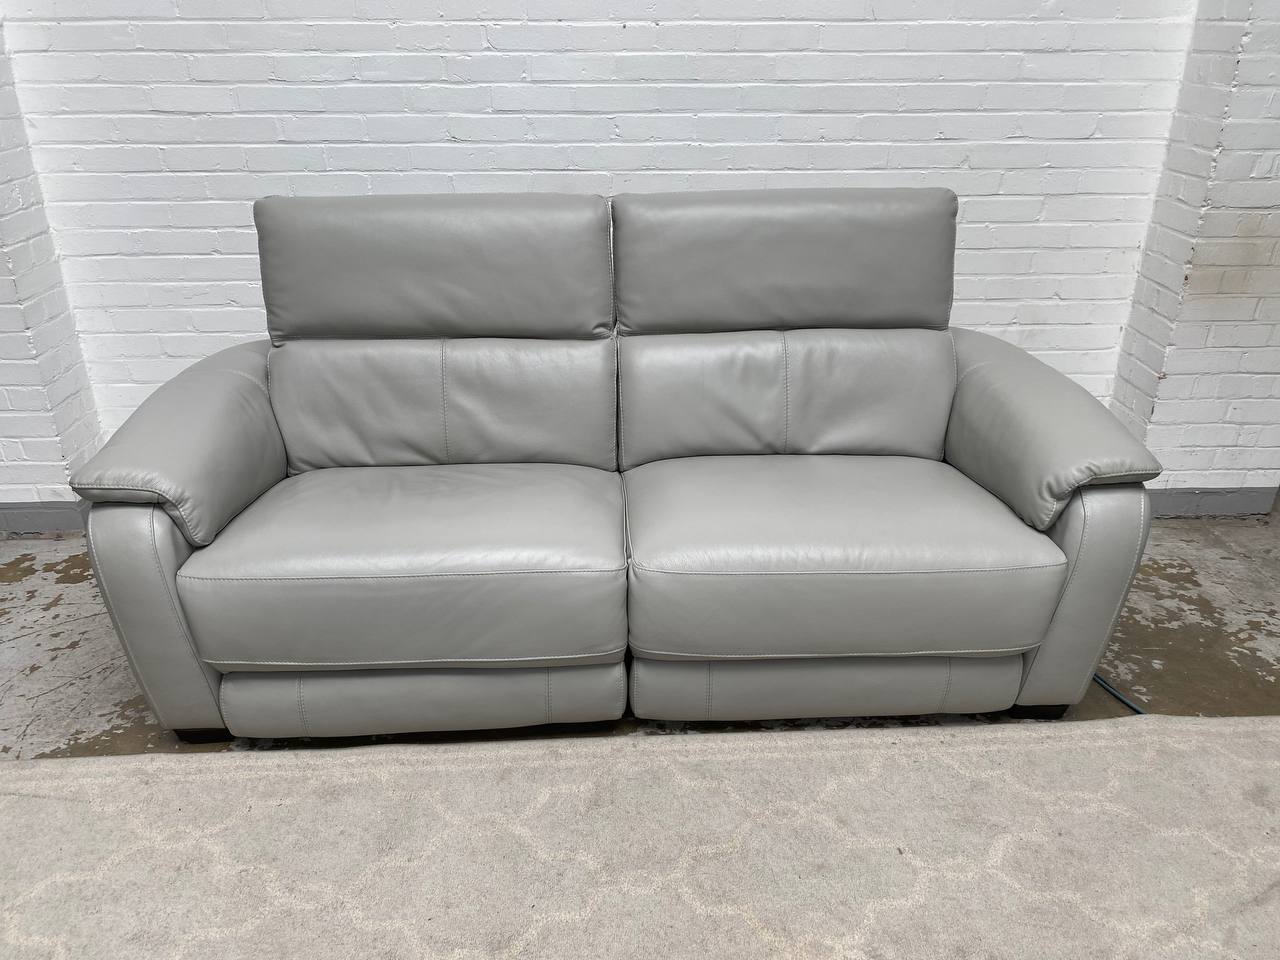 World of Leather Naomi Power Recliner 3 Seater Sofa.